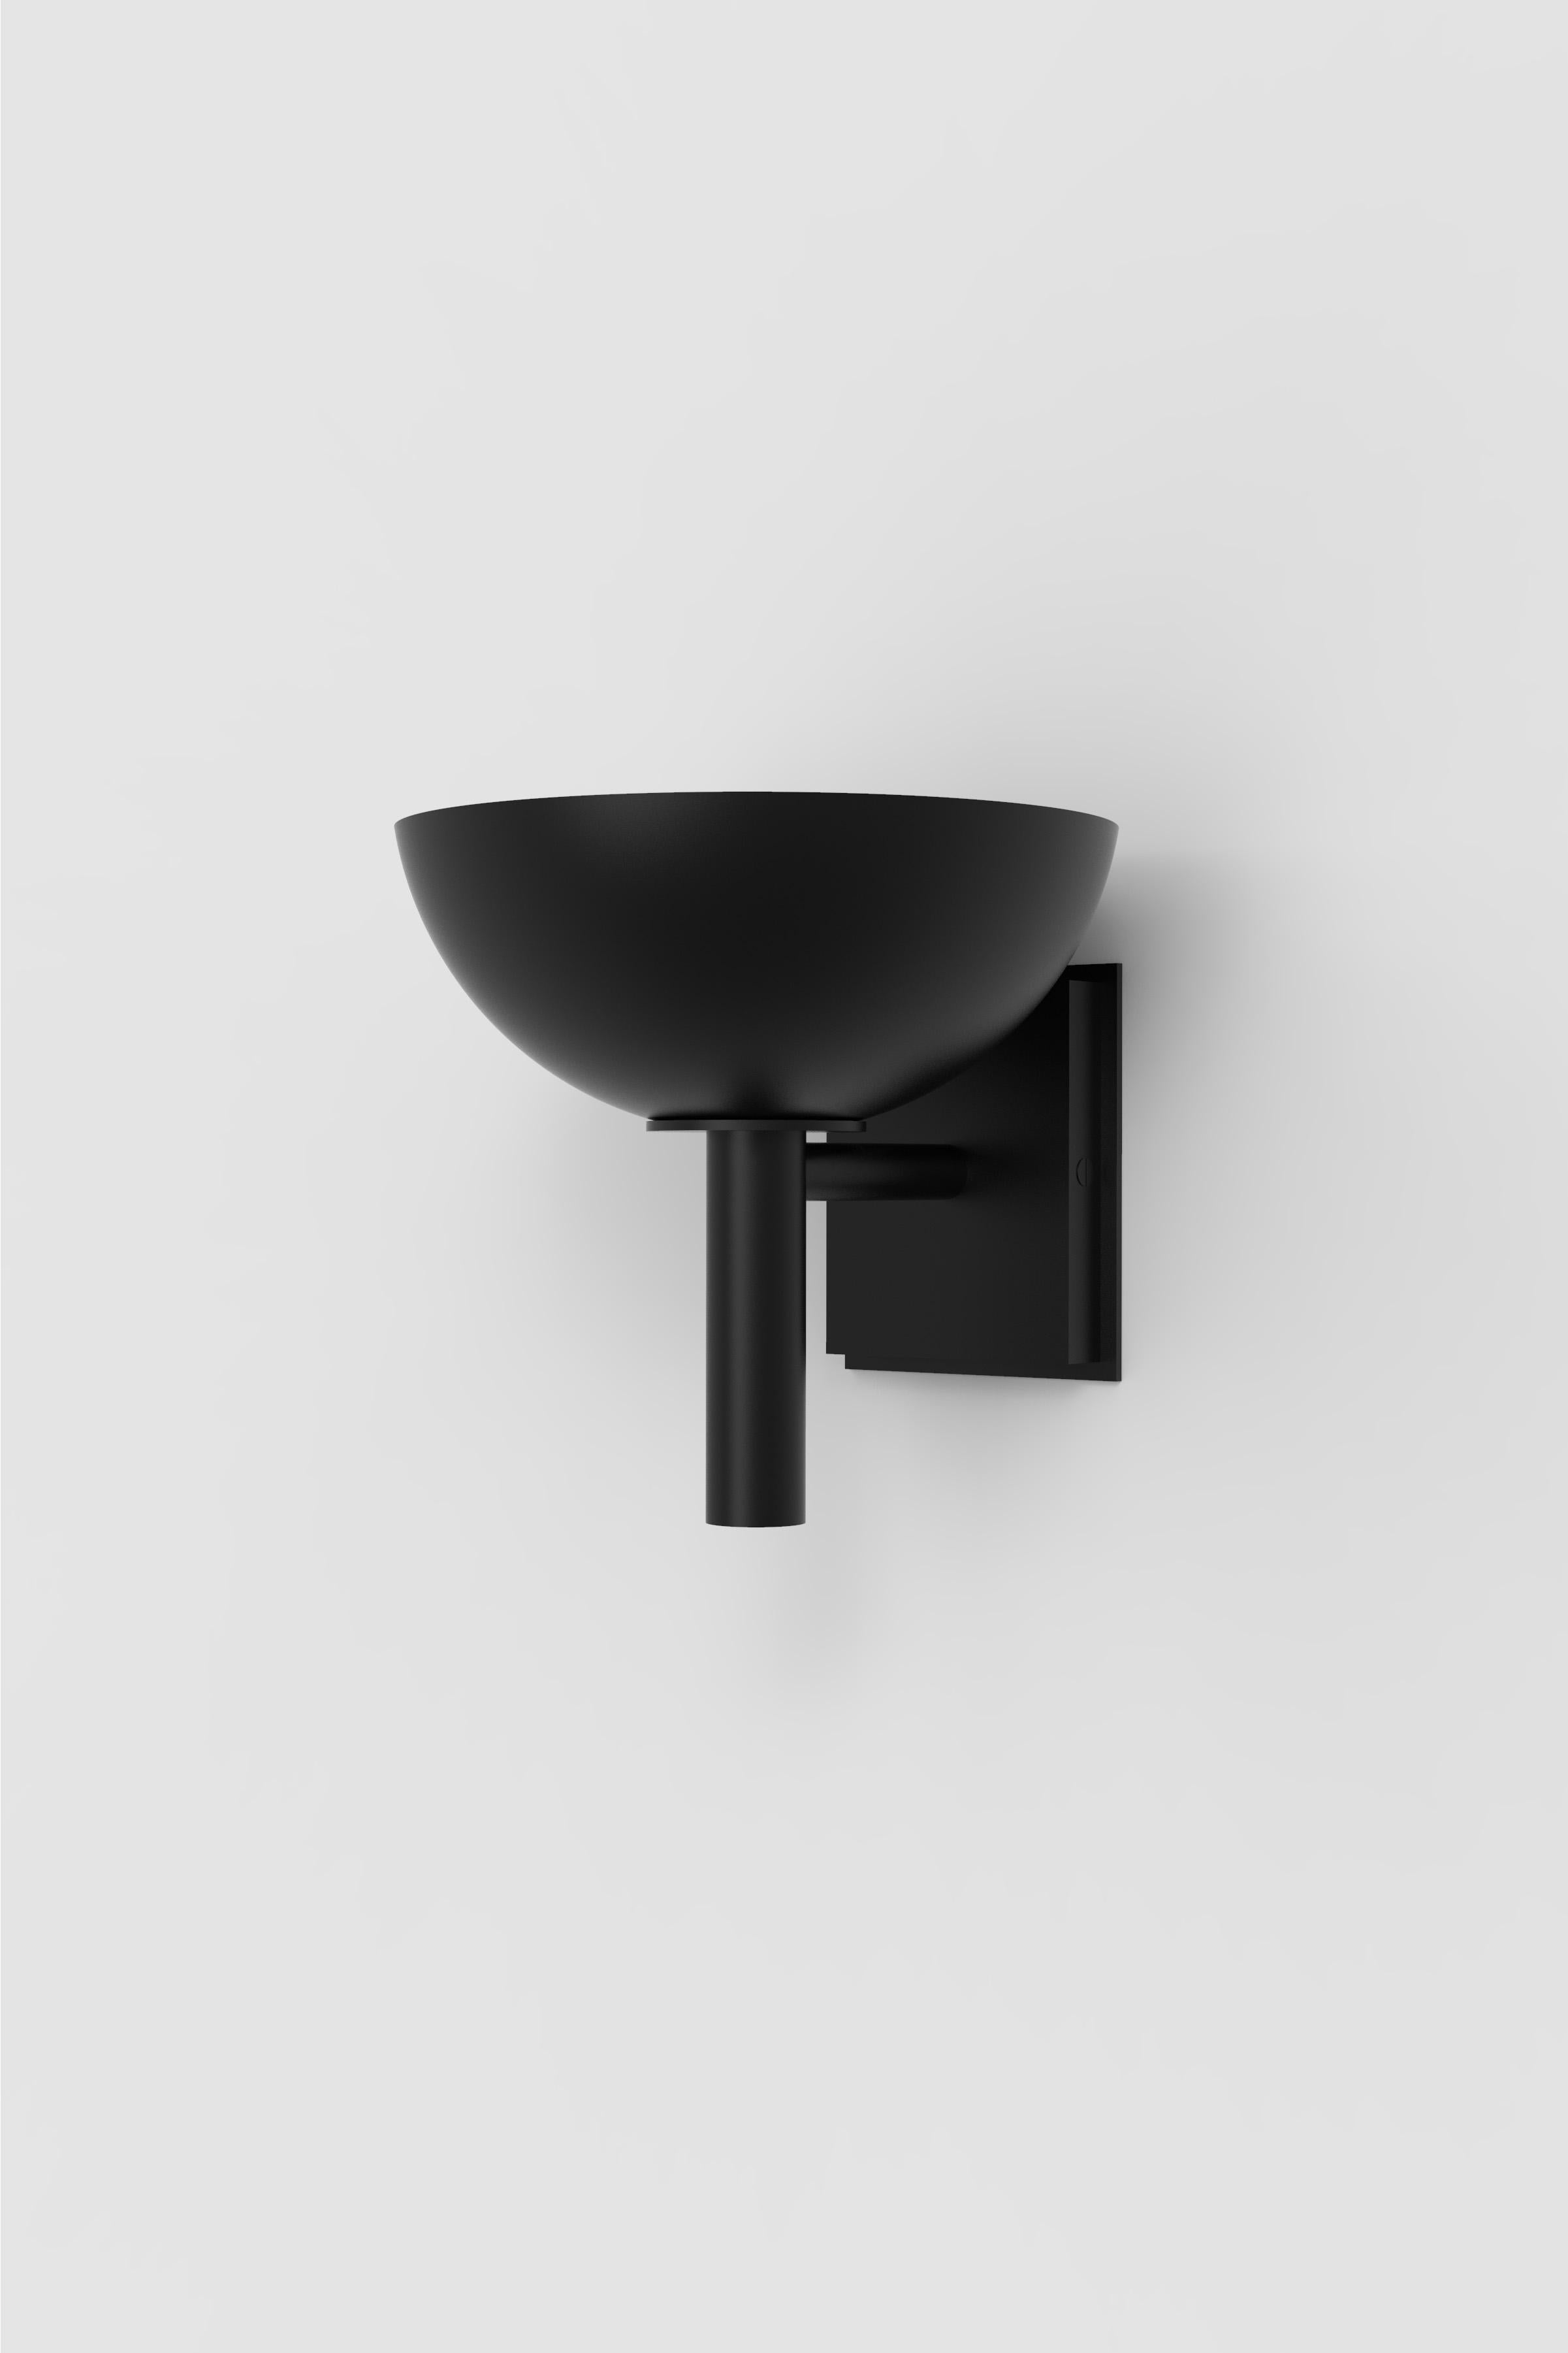 Orphan work 200 Sconce BLK, 2020
Shown in blackened brass
Available in brushed brass and blackened brass
Measures: 8.625” height x 9.75” depth x 9.5